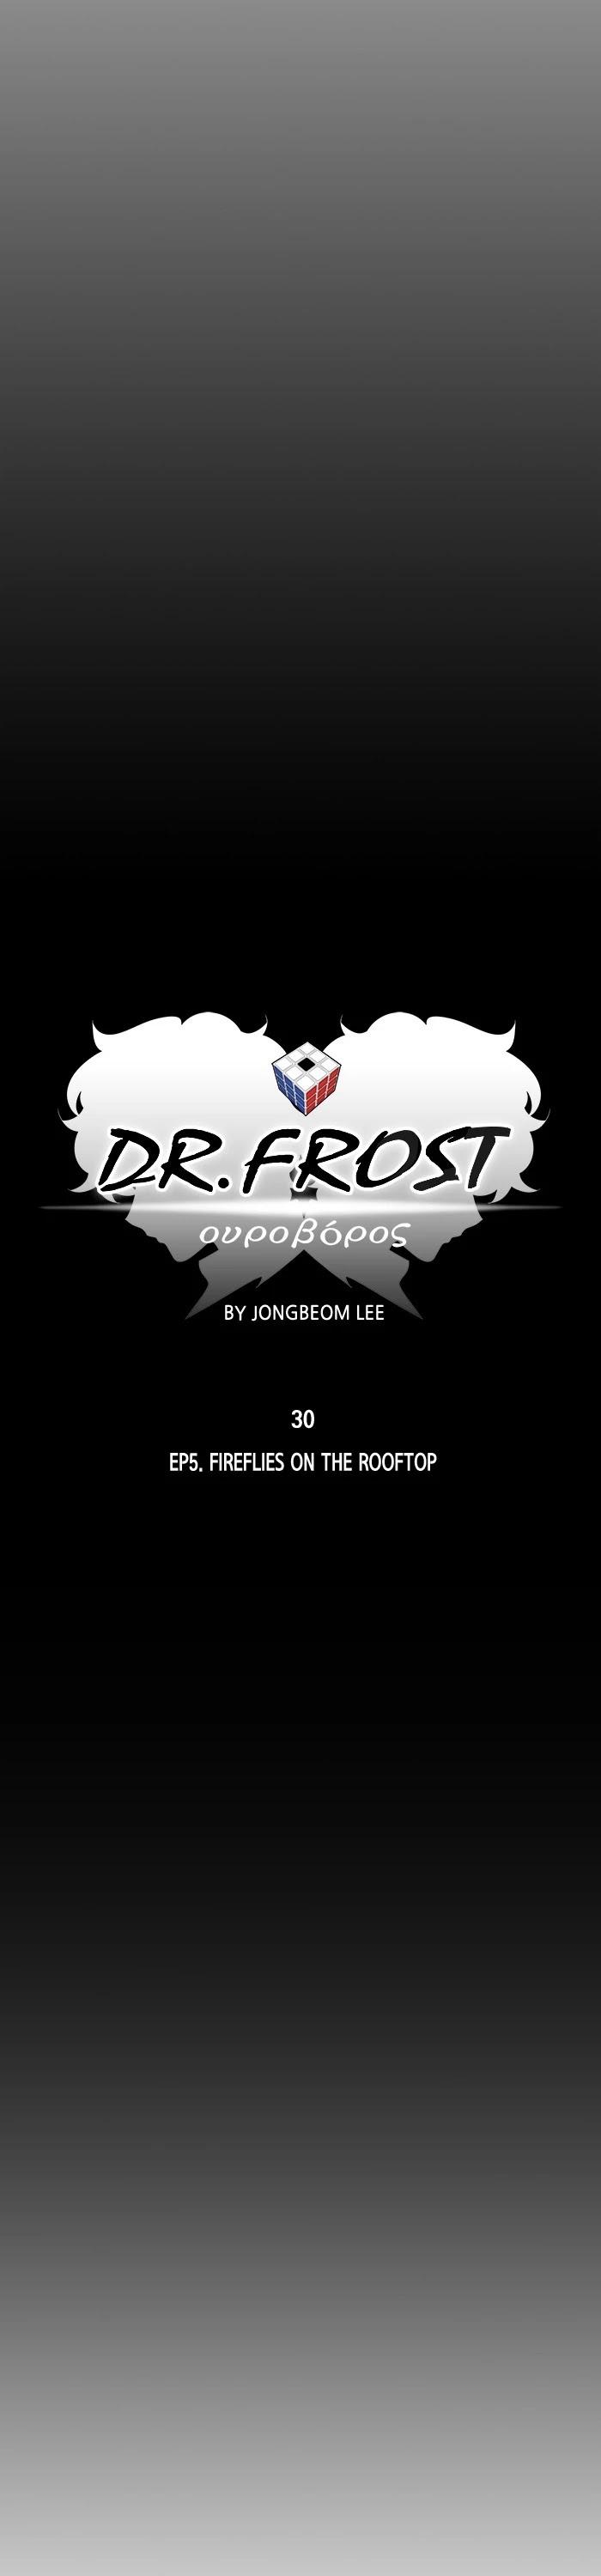 Dr Frost - episode 193 - 5